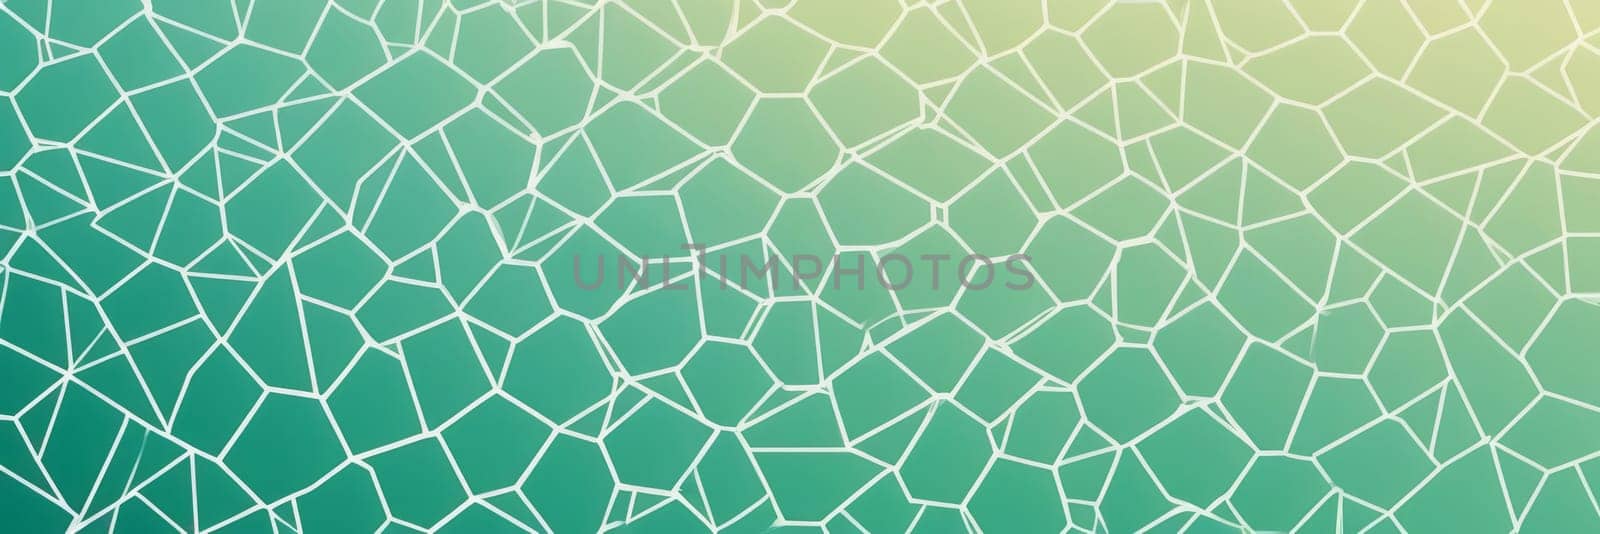 Pentagonal Shapes in White and Mint cream by nkotlyar